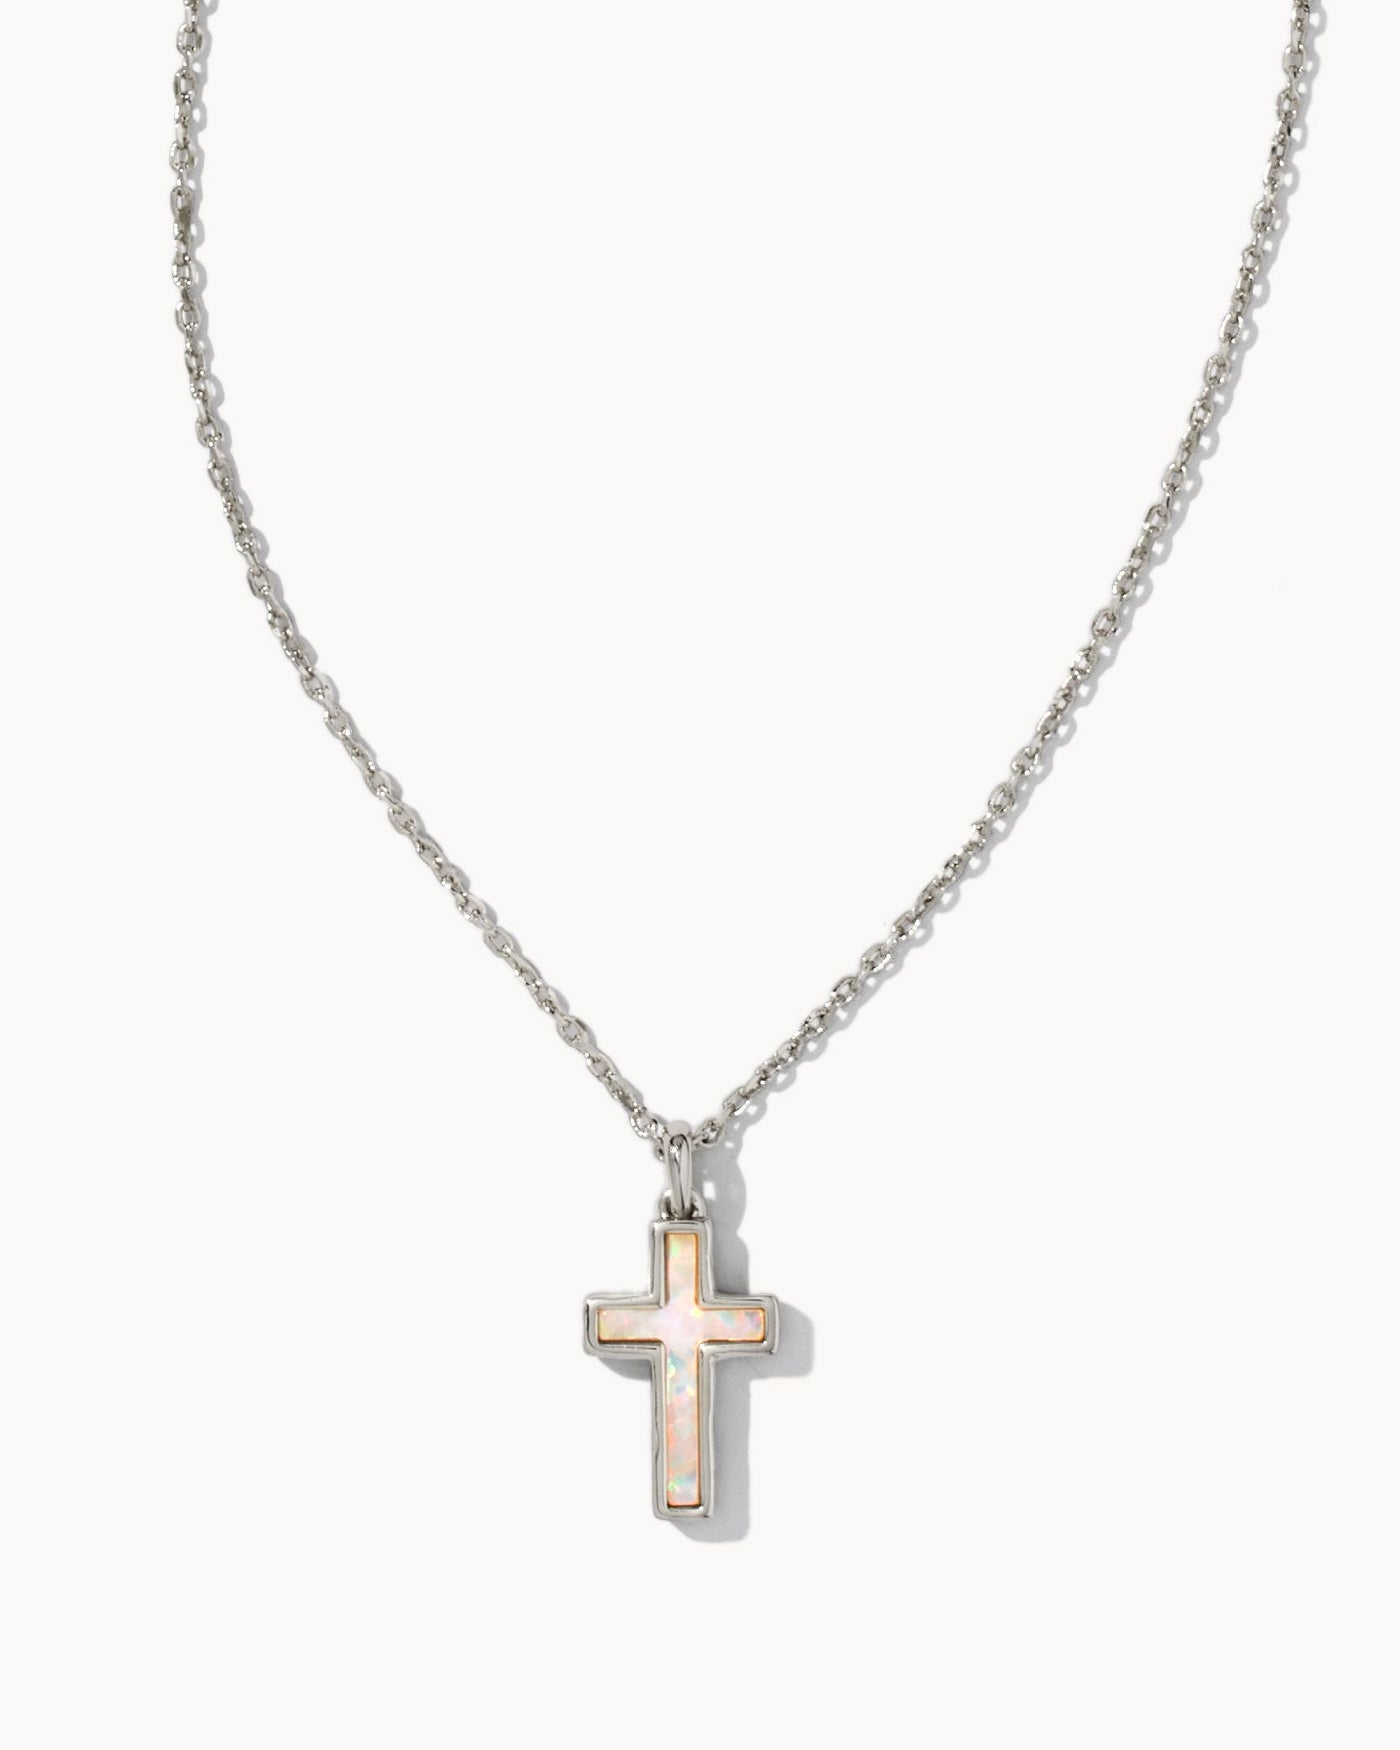 Kendra Scott Cross Pendant Necklace Silver White Opal-Necklaces-Kendra Scott-Market Street Nest, Fashionable Clothing, Shoes and Home Décor Located in Mabank, TX